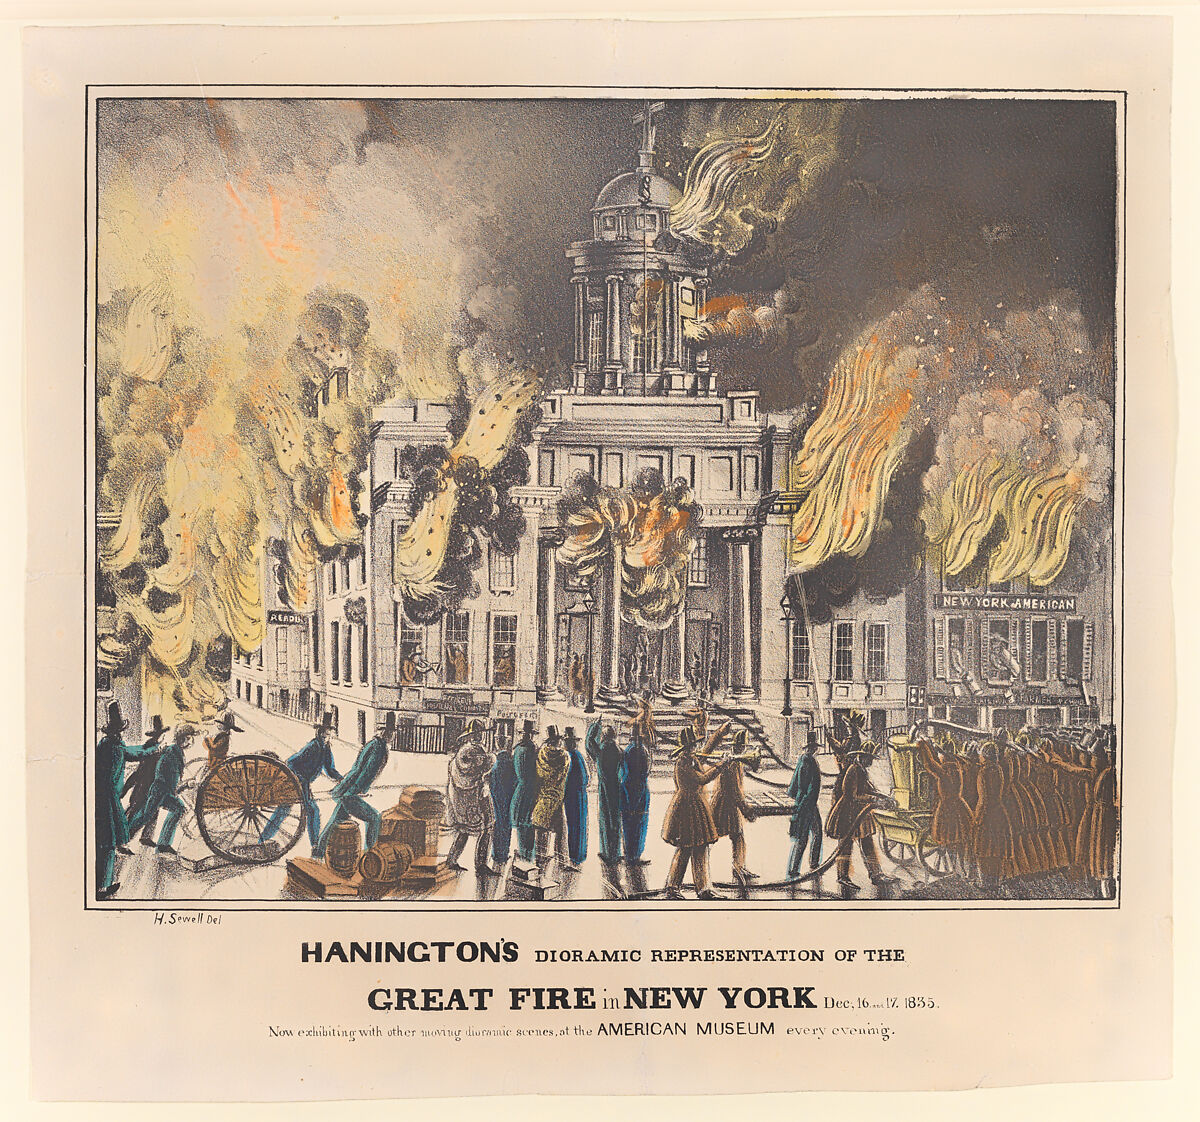 Hanington's Dioramic Representation of the Great Fire in New York, Dec. 16 and 17, 1835. Now Exhibiting with Other Moving Dioramic Scenes, at the American Museum Every Evening..., H. Sewell (American, active New York, 1836–37), Hand-colored lithograph 